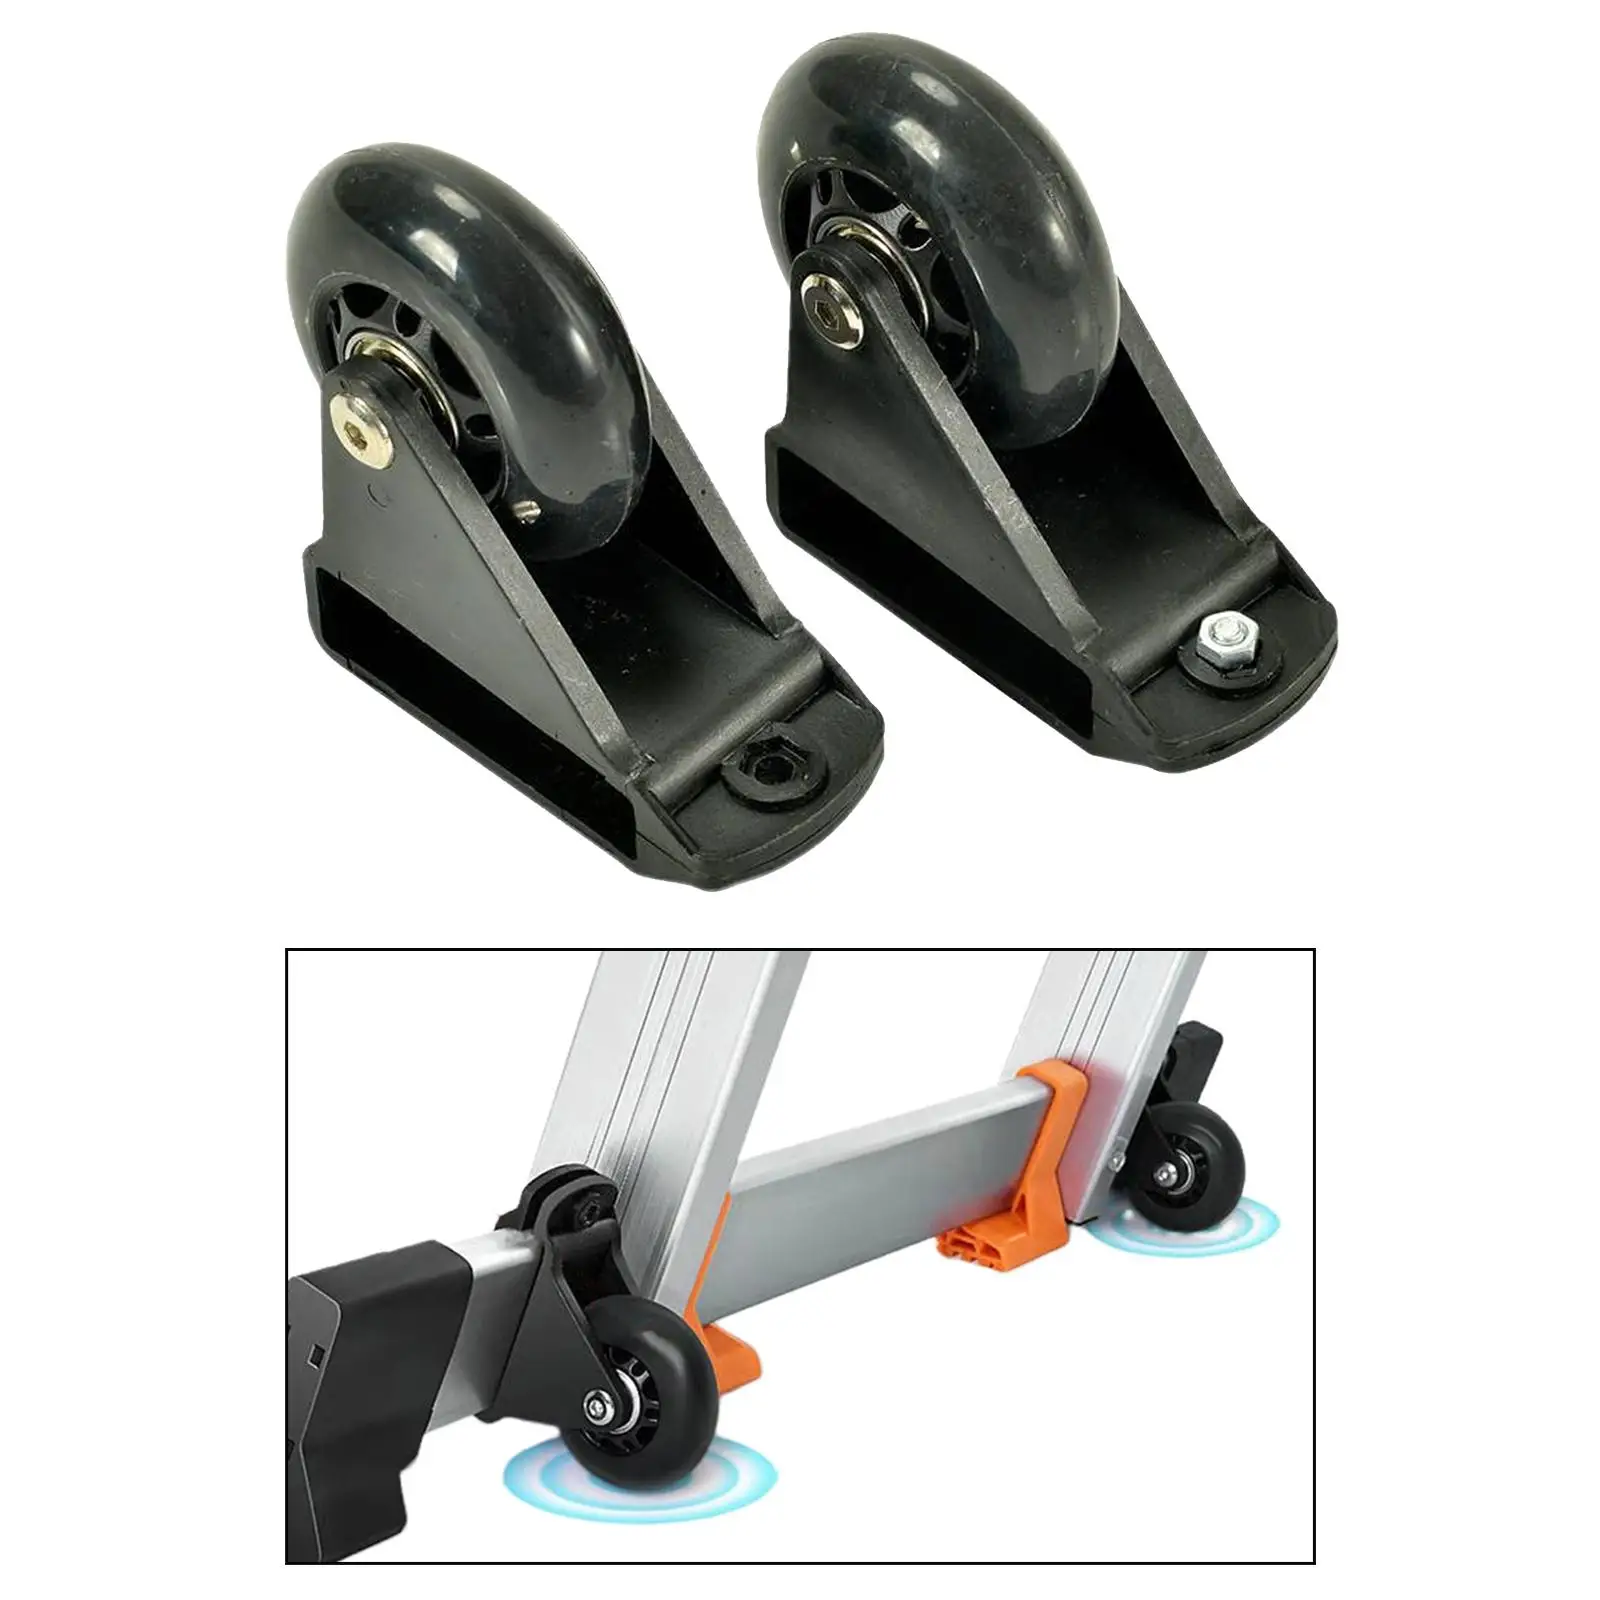 2Pcs Ladder Leveling Casters Convenient Heavy Duty 330 lbs Capacity Portable Ladder Caster Extension for Workbench Shelves